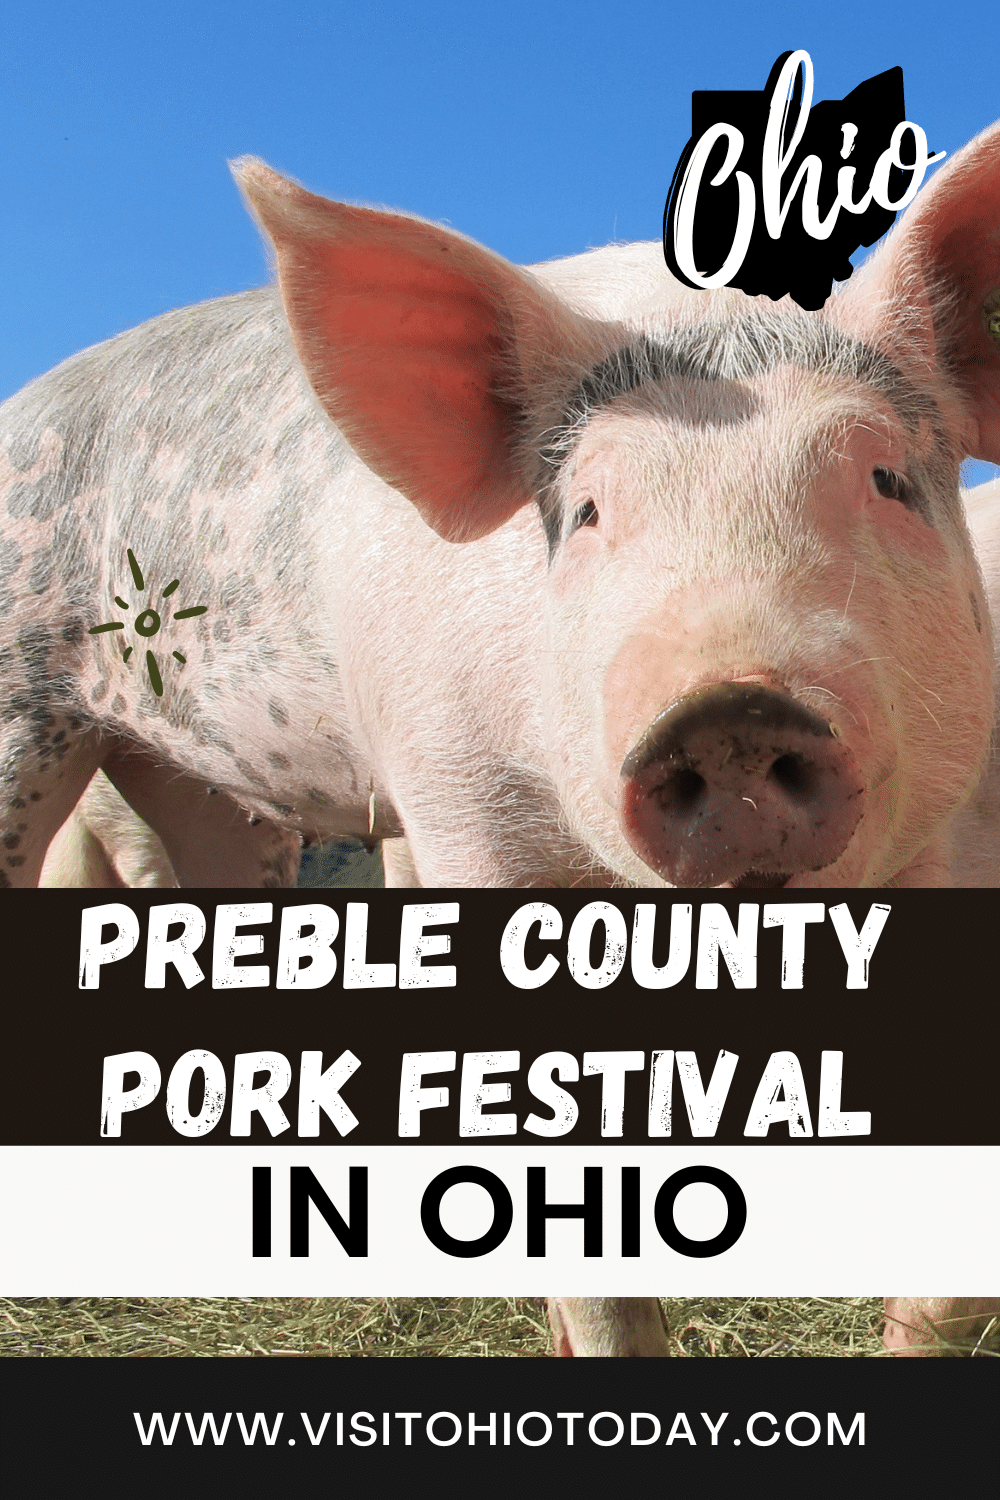 Preble County Pork Festival is a popular event that is always the third full weekend in September. The pork festival takes place in Eaton, Ohio.